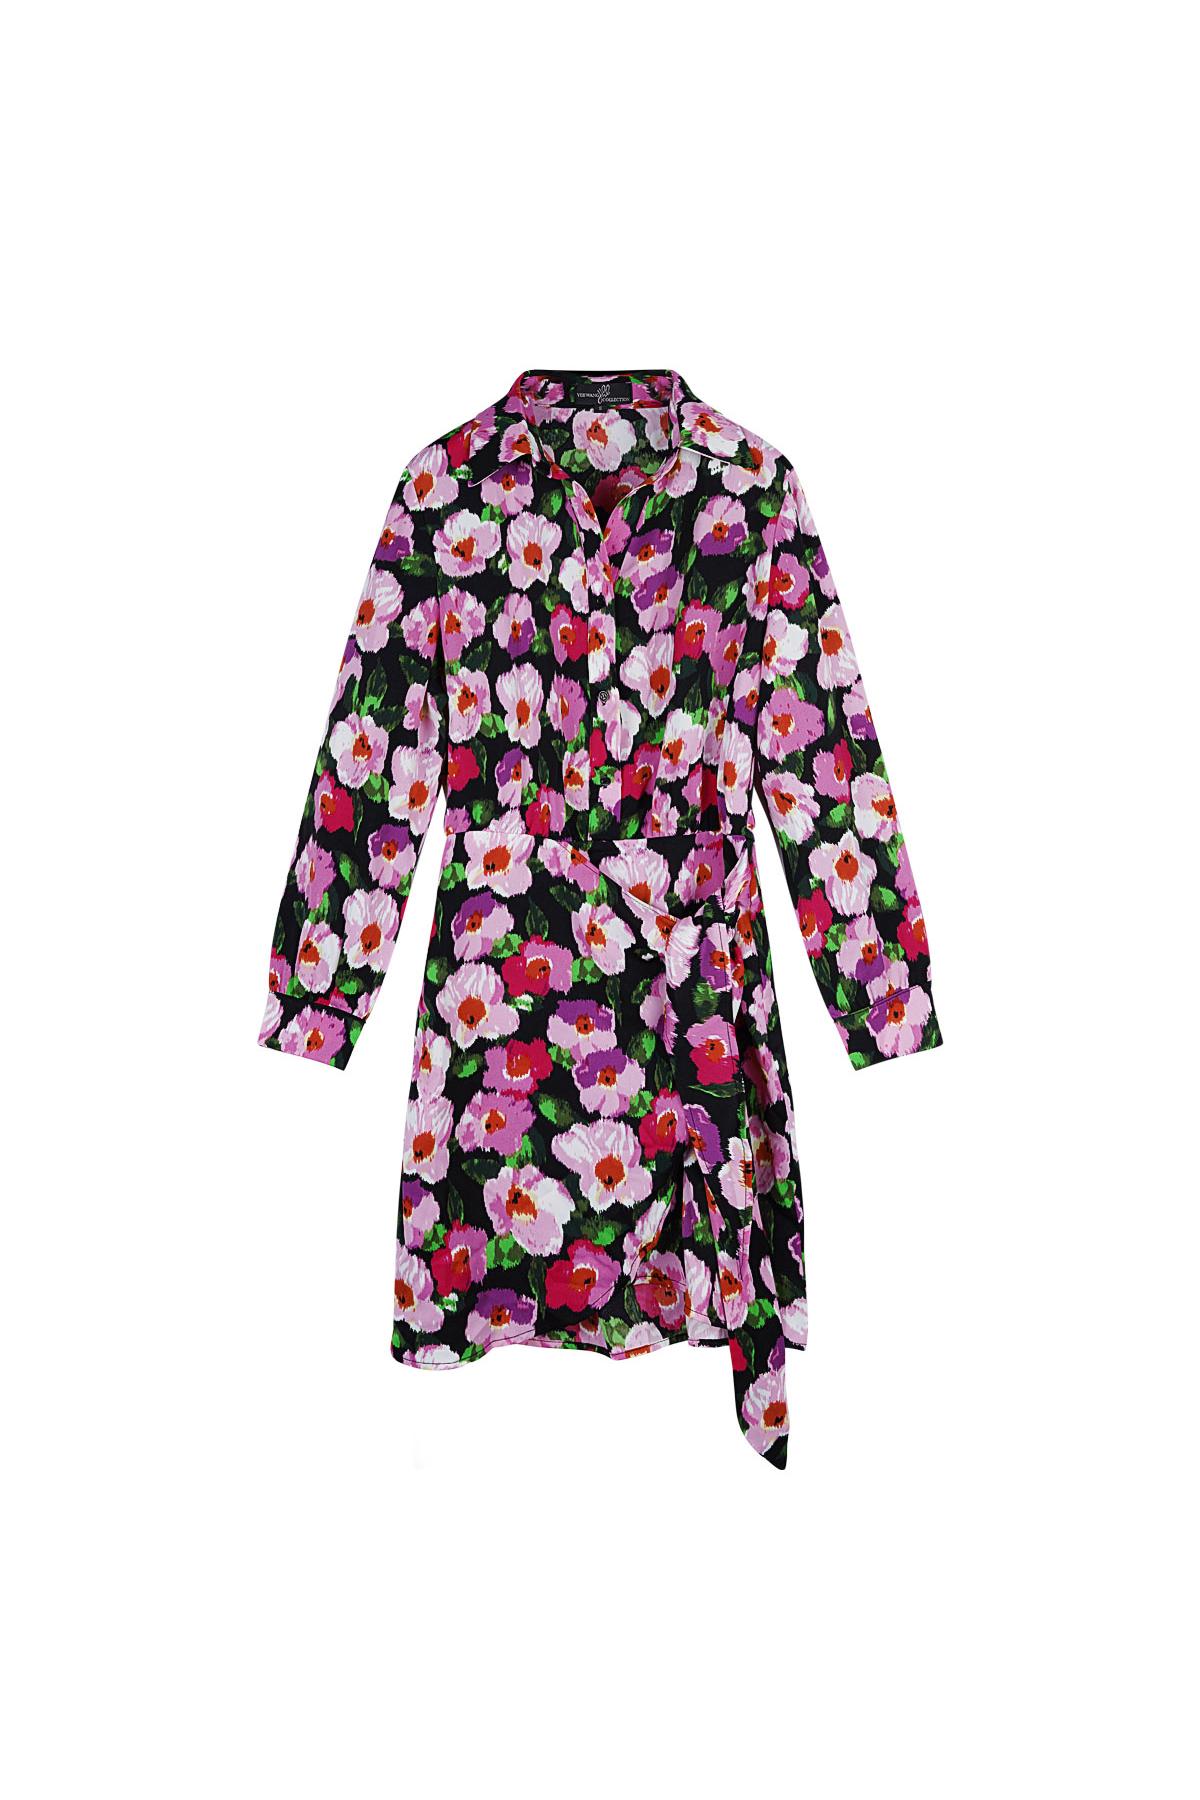 Flower print dress with button detail Black Multi S 